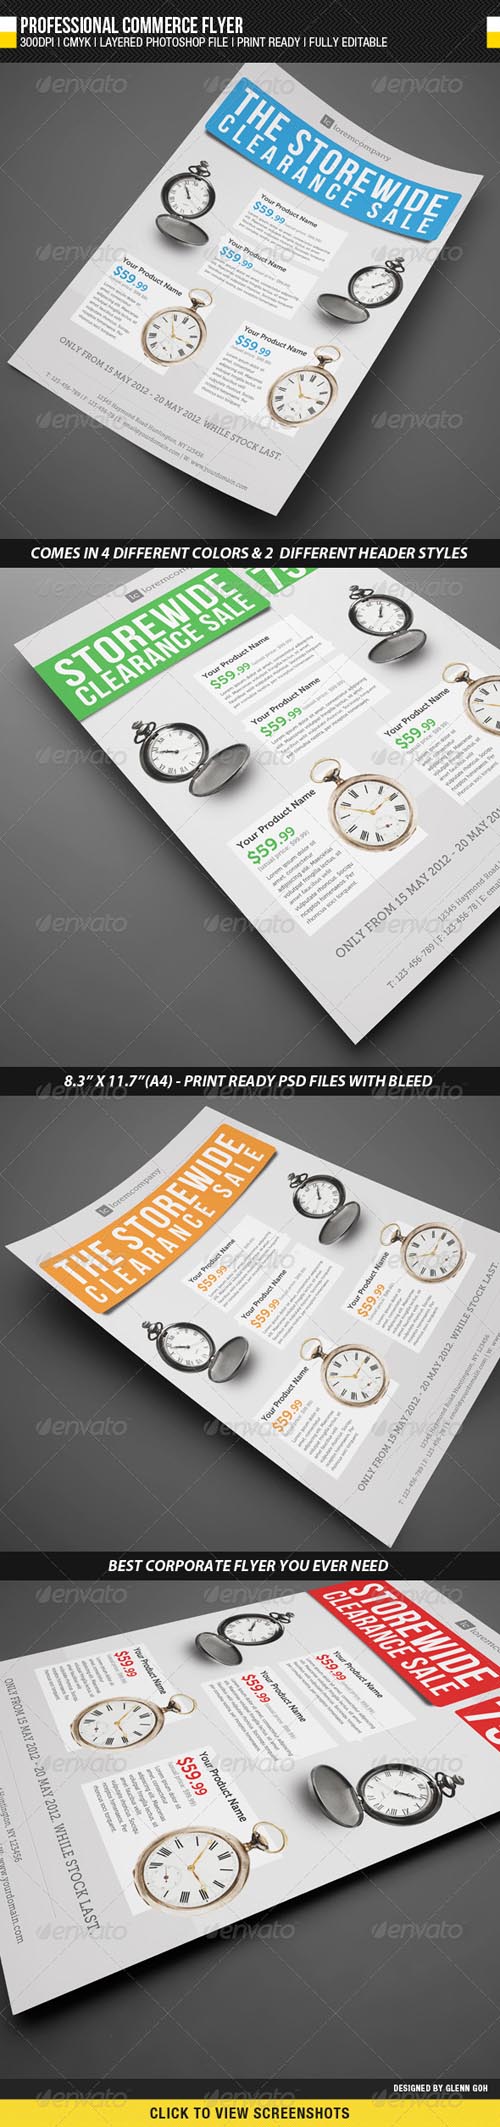 GraphicRiver - Professional Commerce Flyer